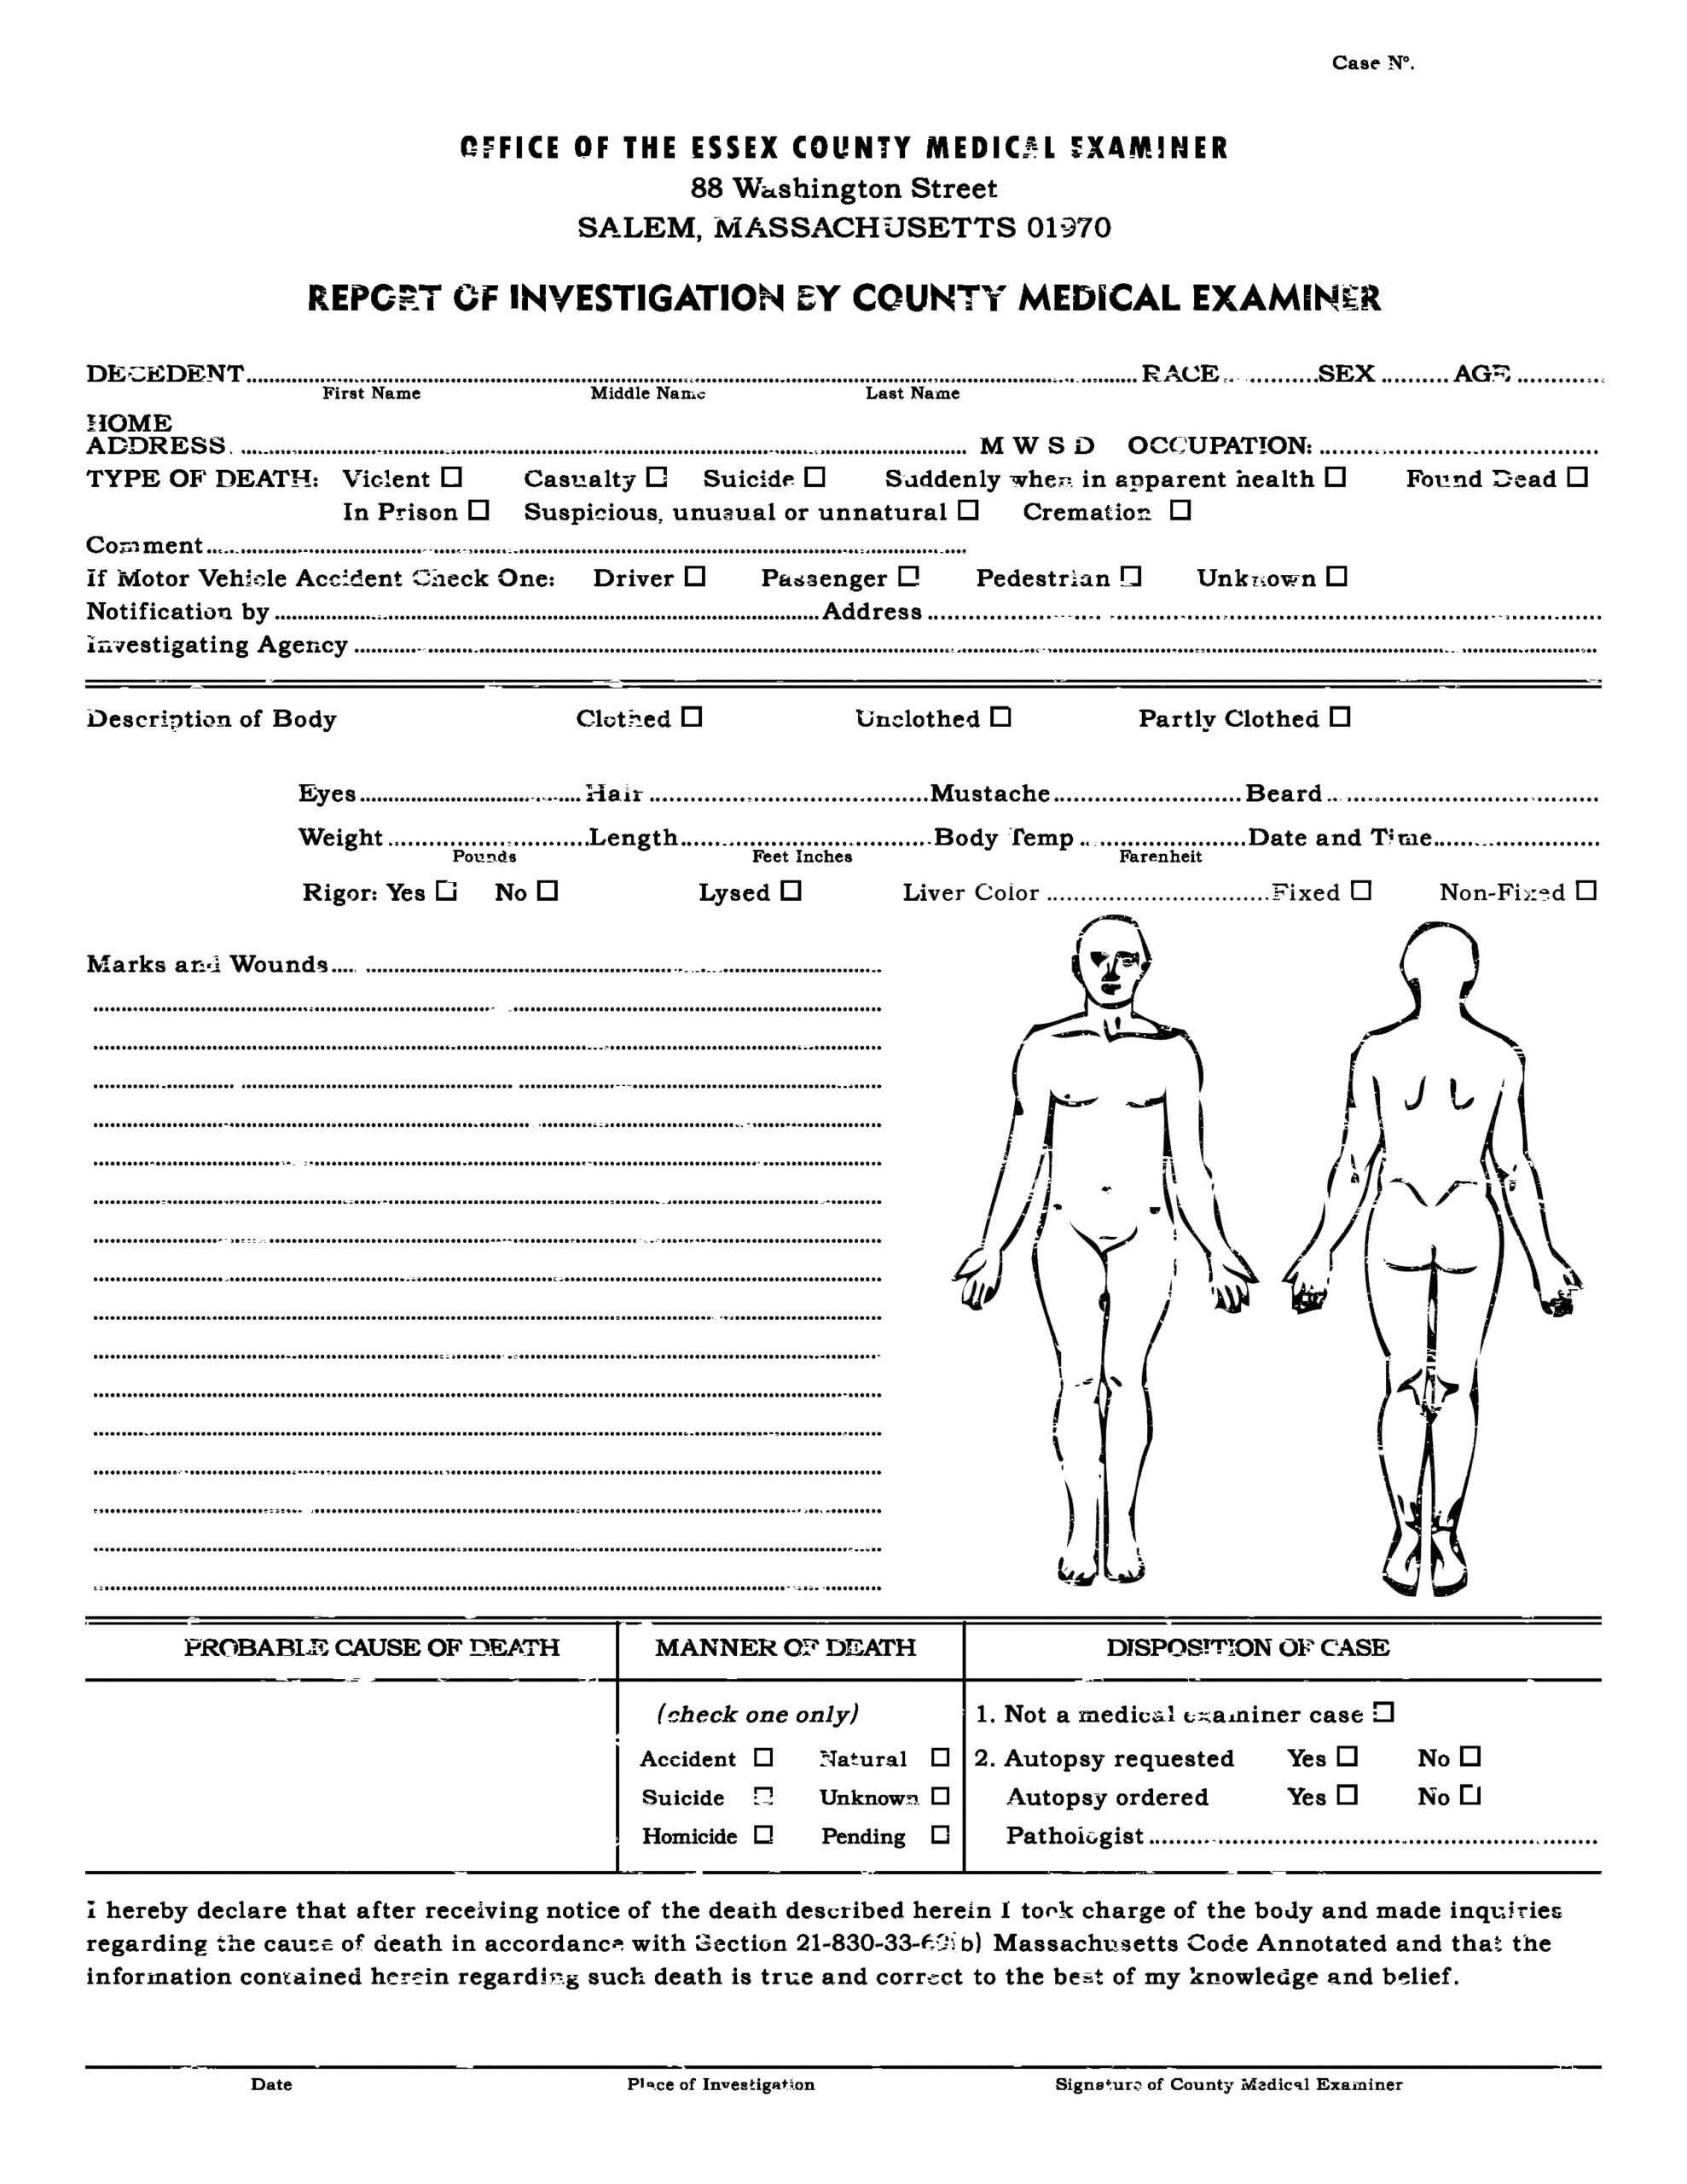 Autopsy Report Template - Atlantaauctionco With Autopsy Report Template